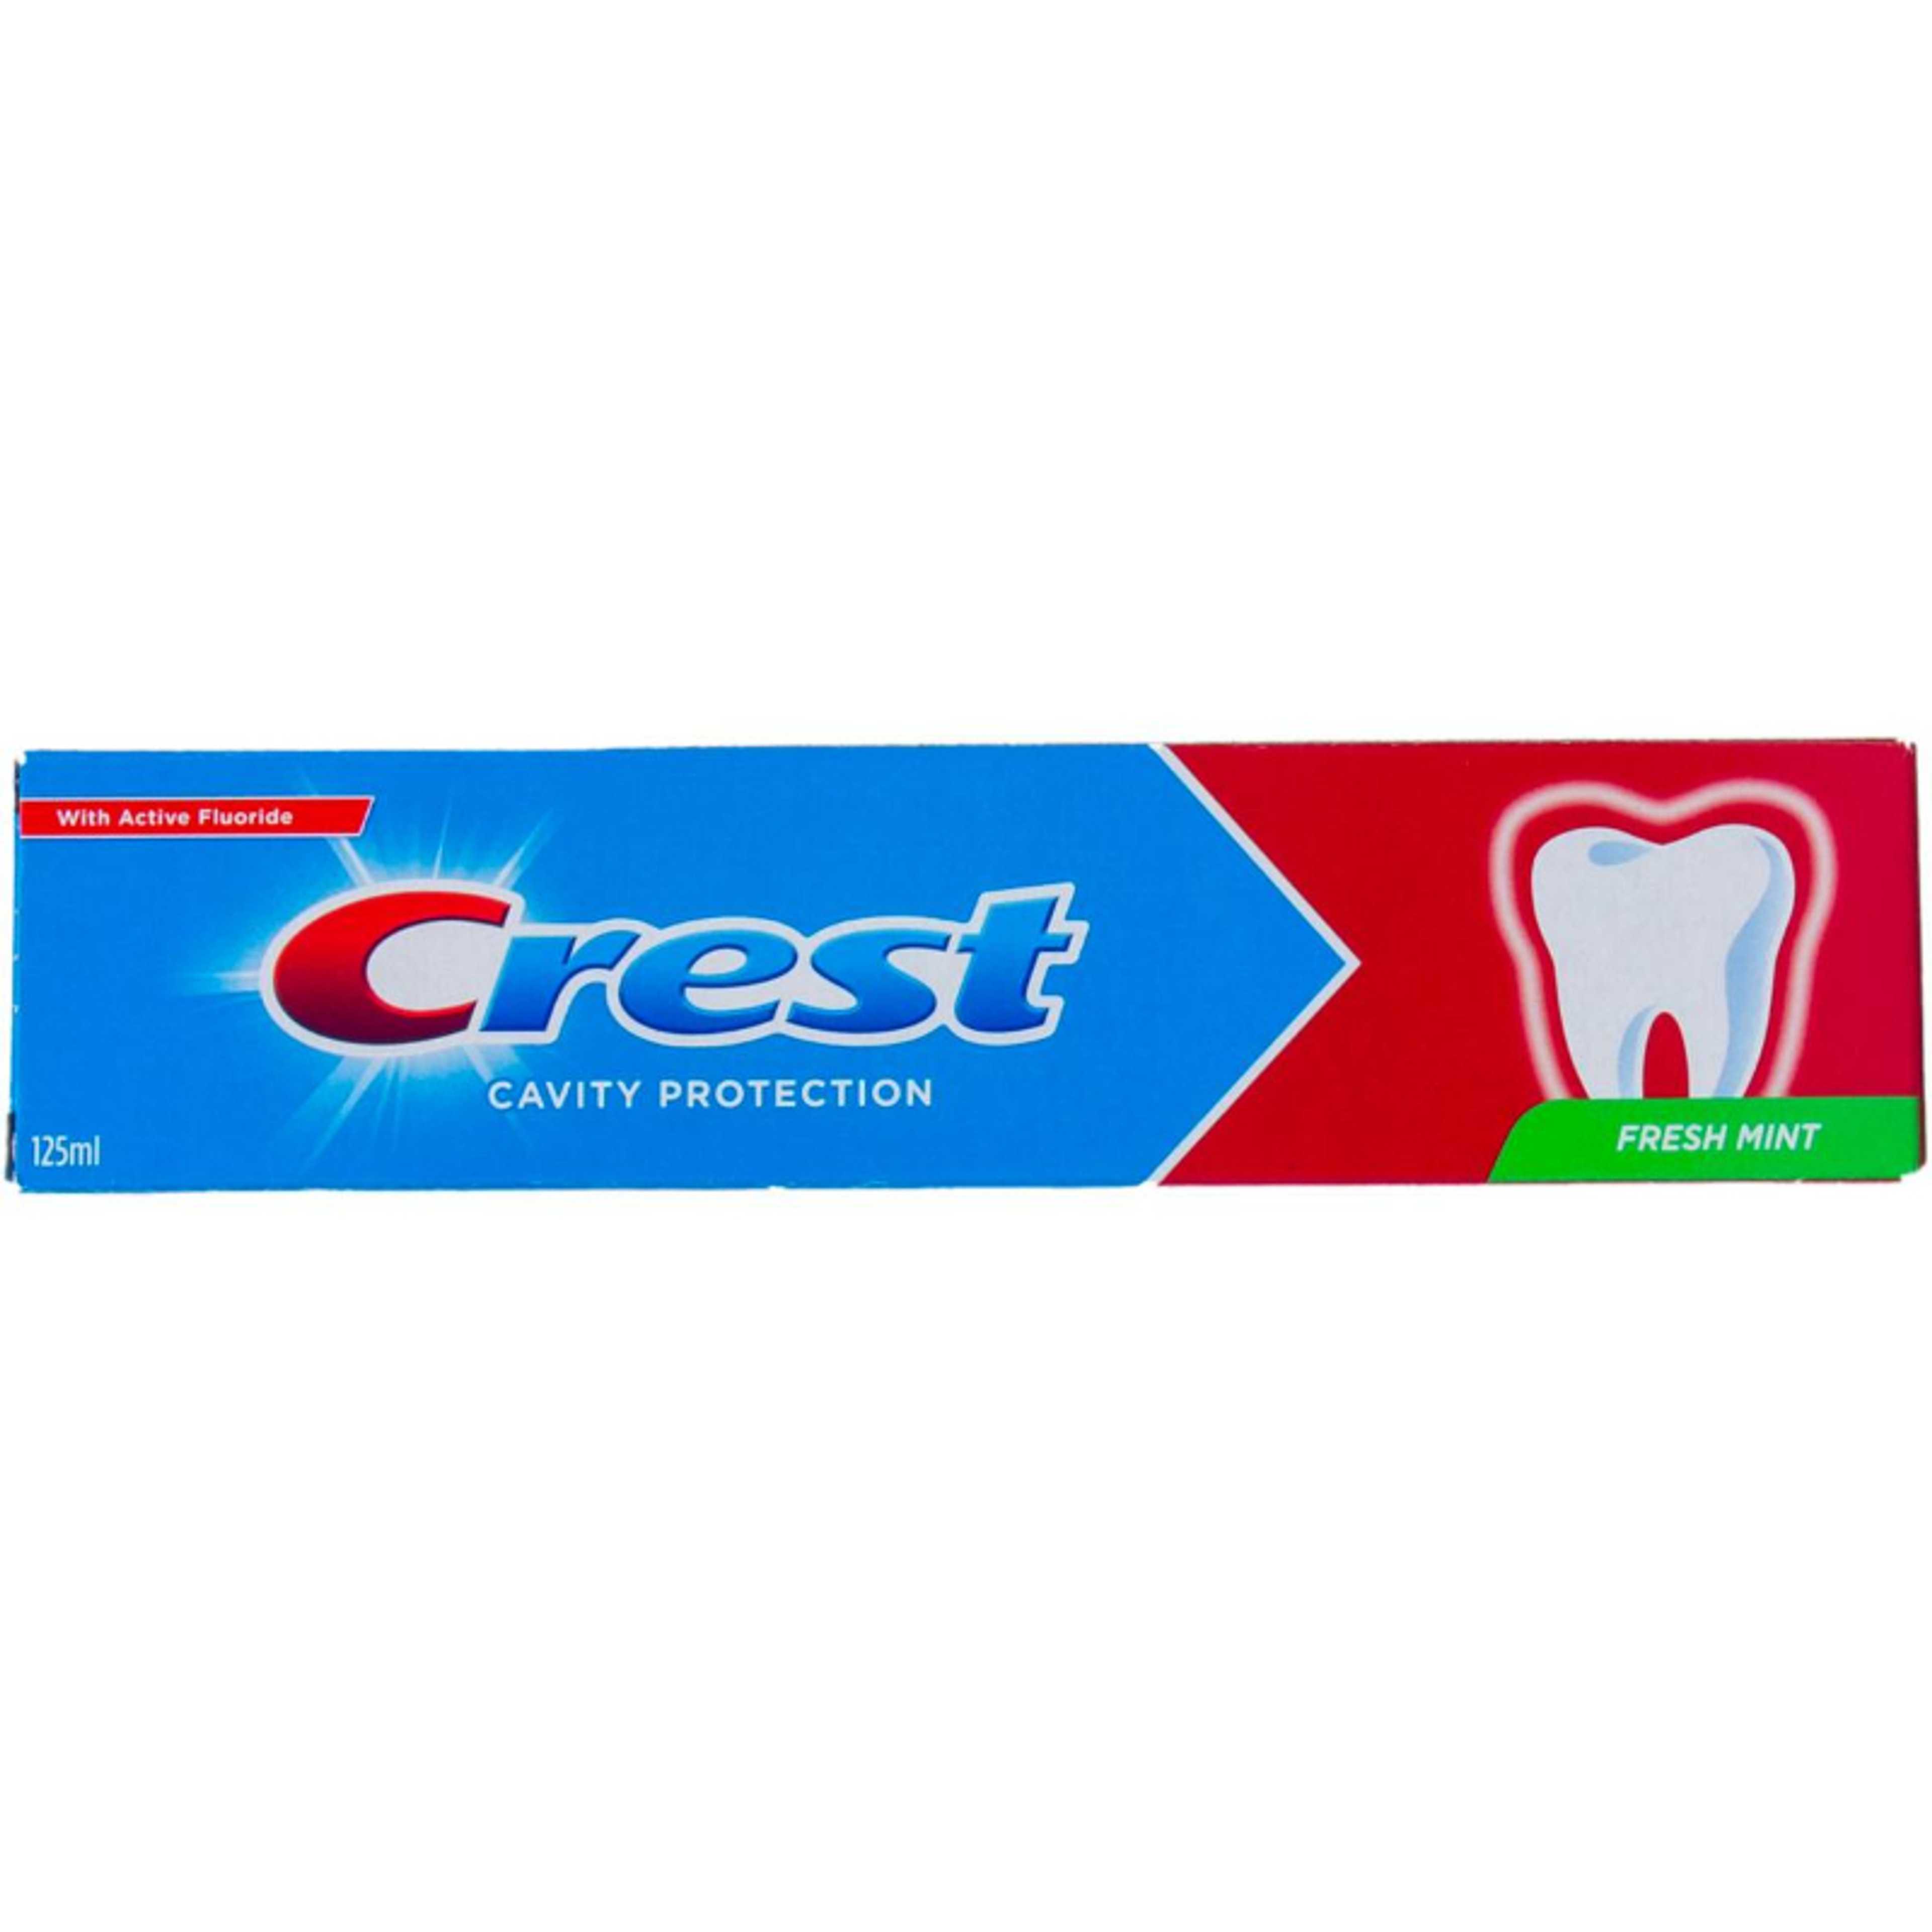 CREST TOOTH PASTE CAVITY PROTECTION FRESH MINT 125ML